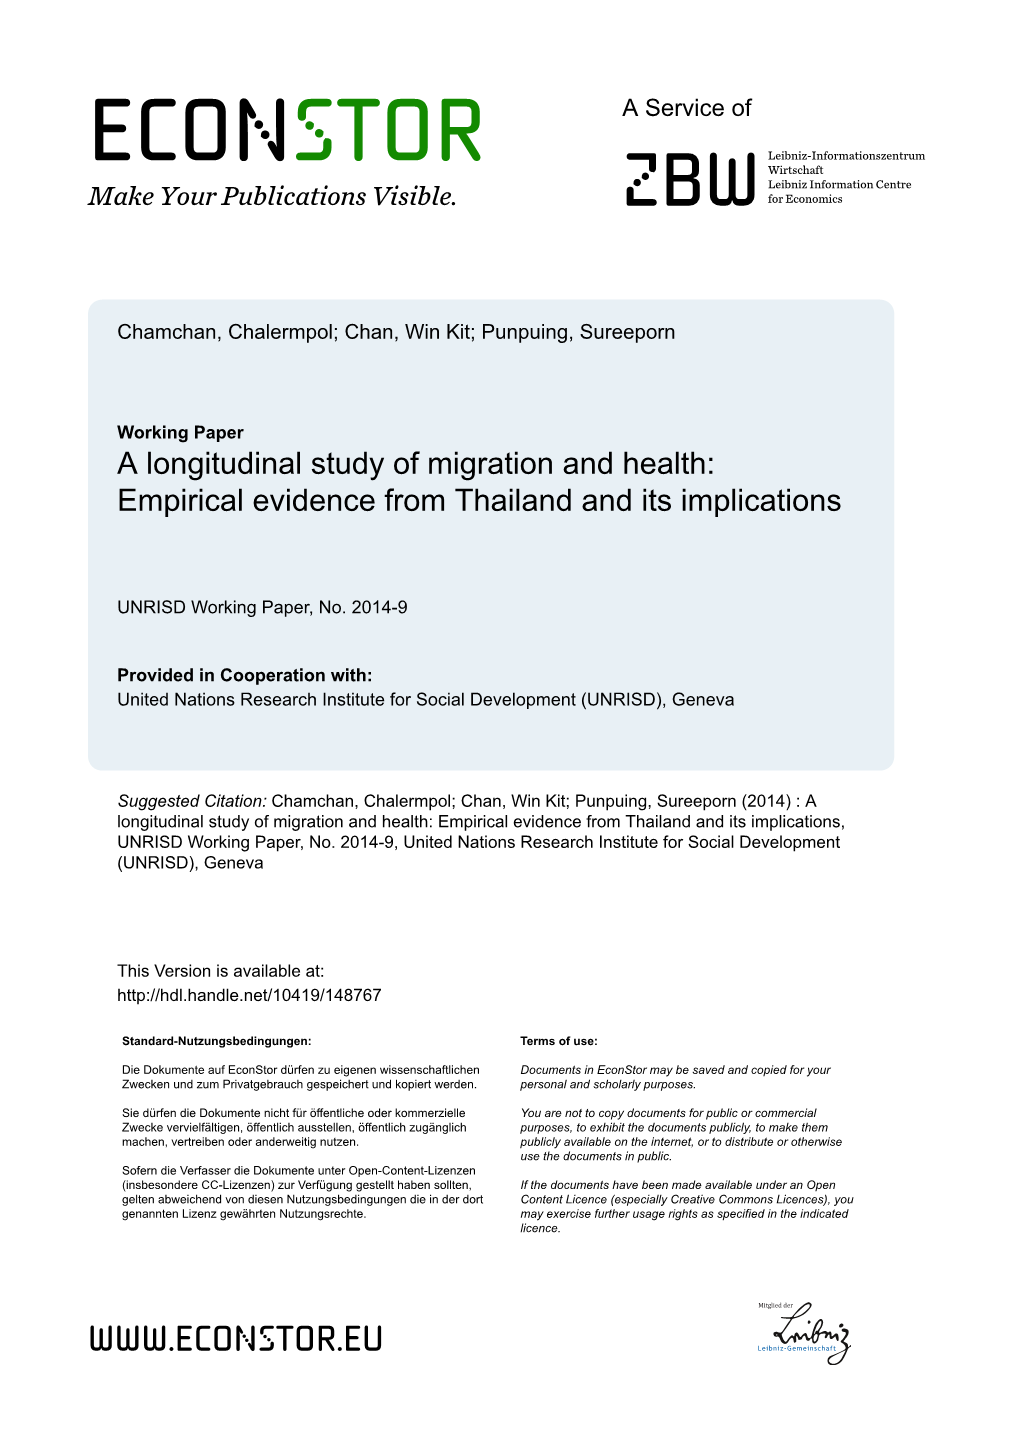 A Longitudinal Study of Migration and Health: Empirical Evidence from Thailand and Its Implications